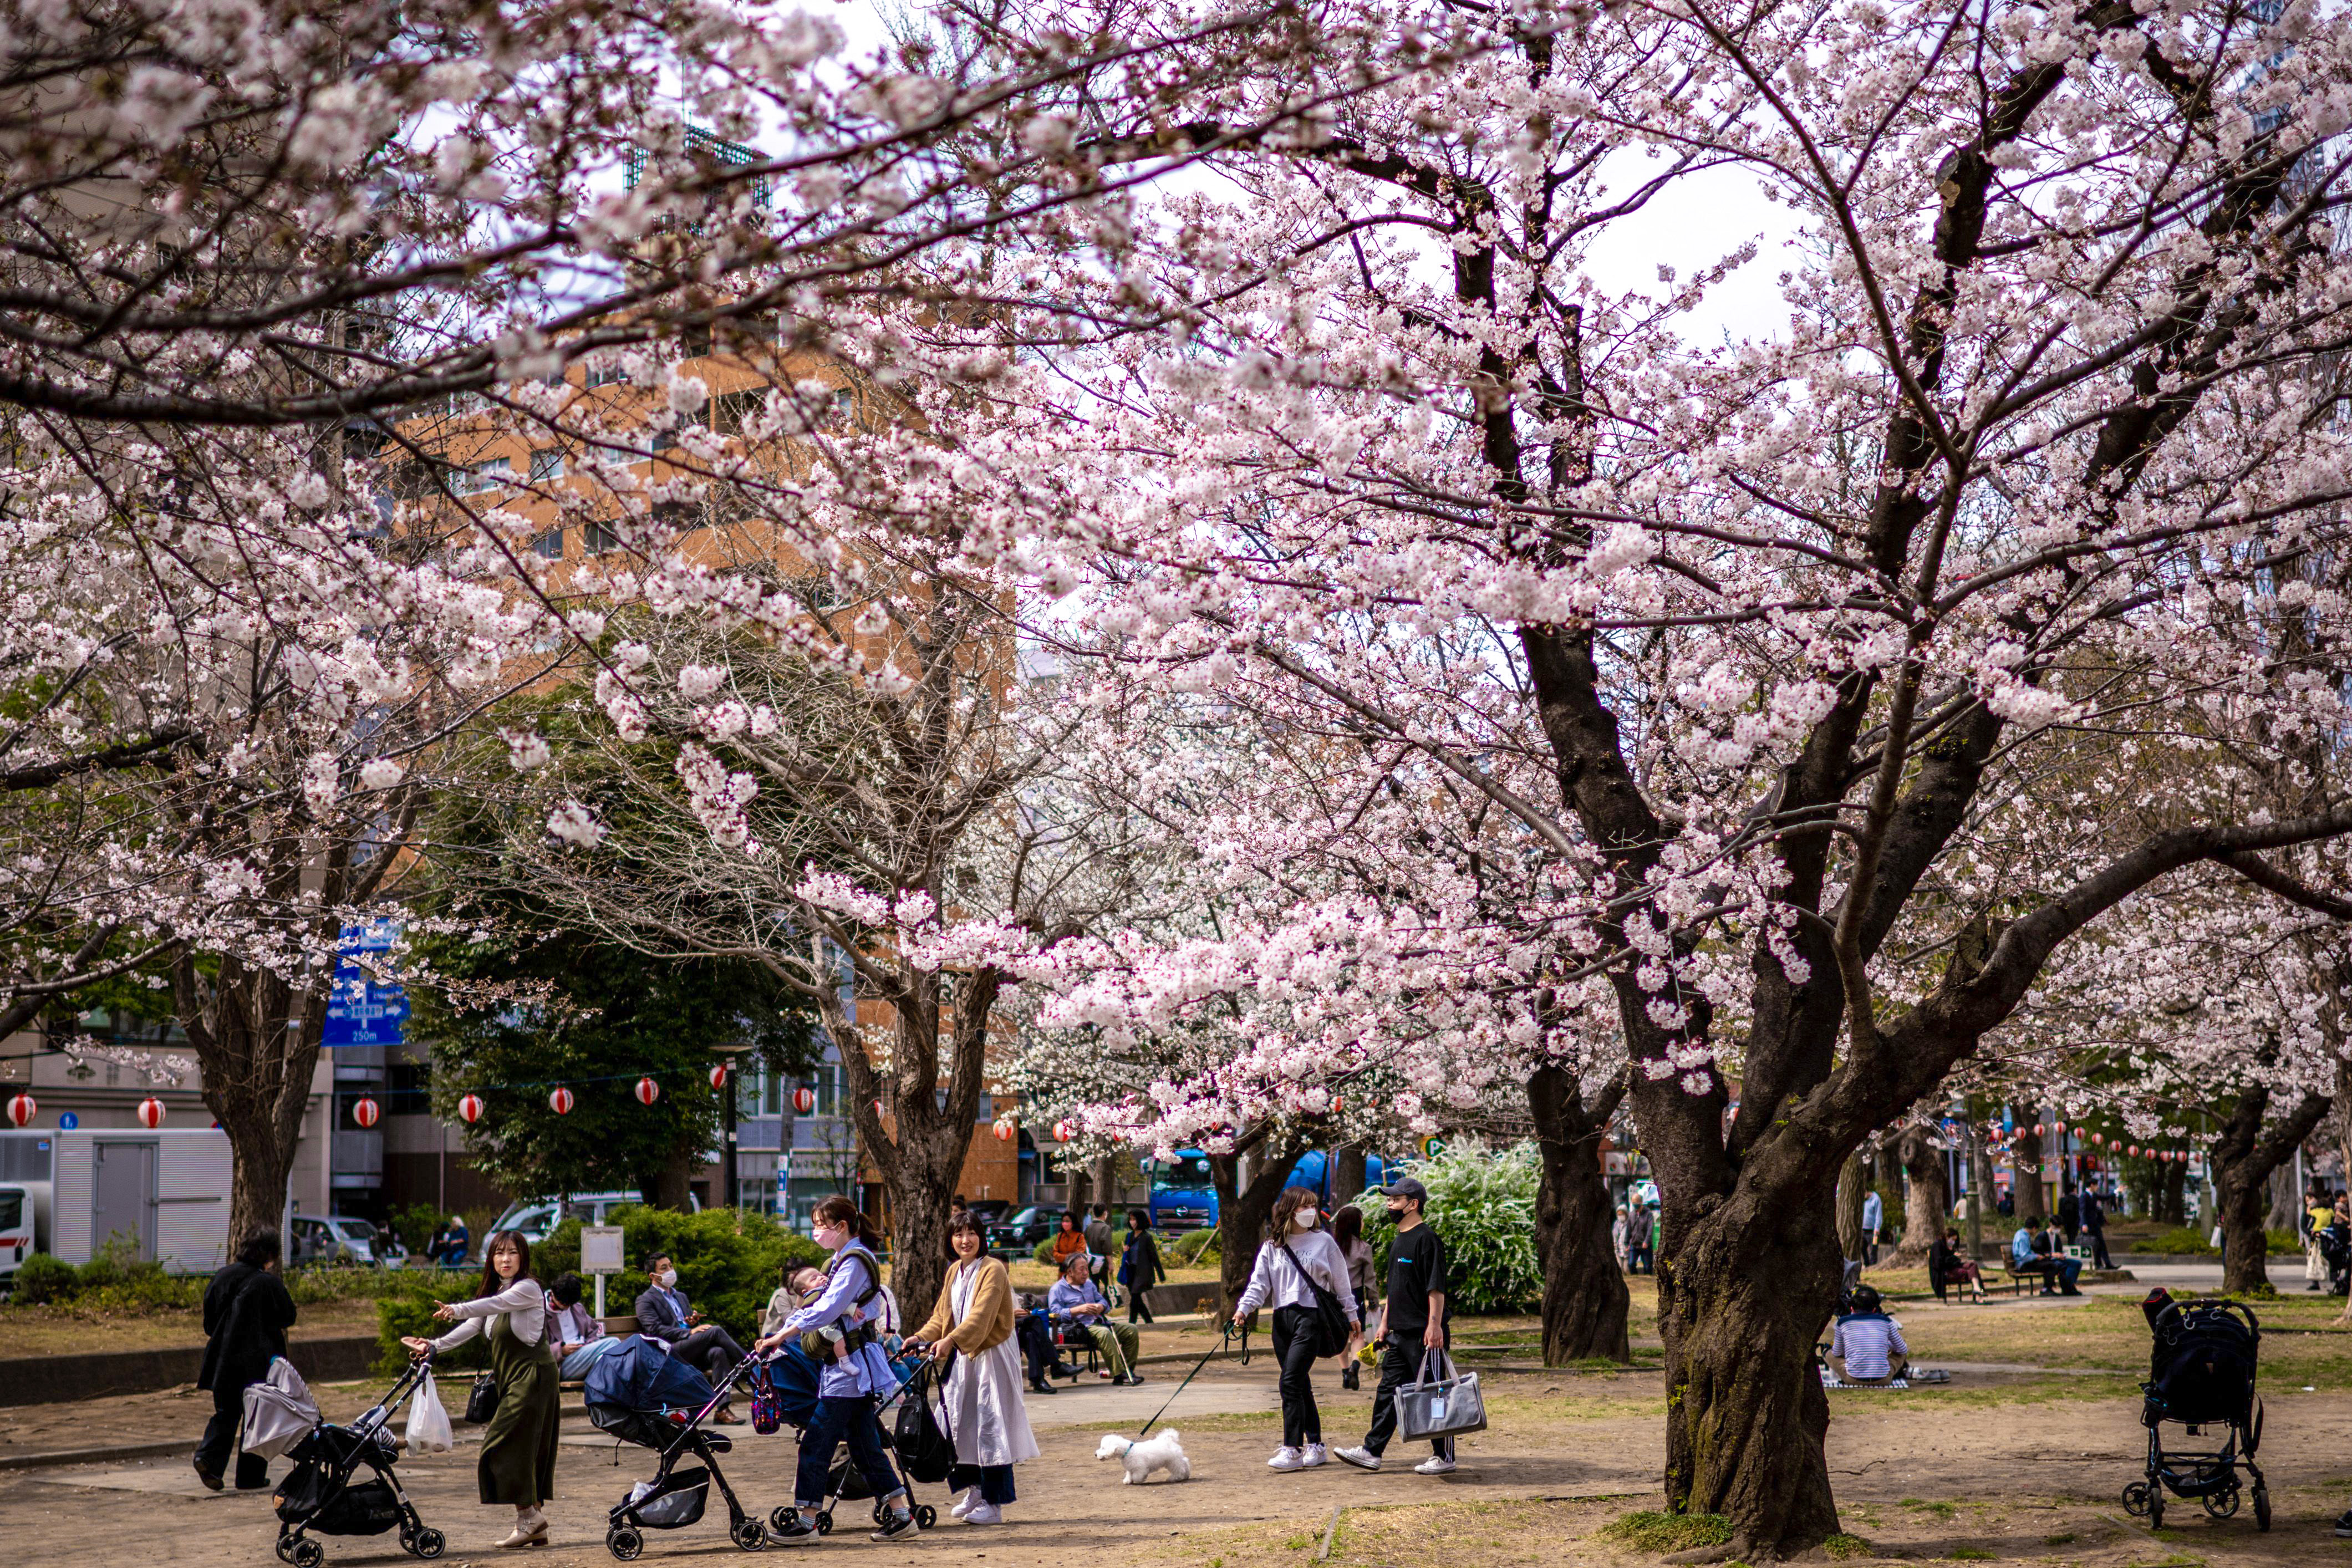 People walk under cherry blossoms in full bloom at a park in the Sumida district of Tokyo on March 22, 2023. (Photo by Philip FONG / AFP) (Photo by PHILIP FONG/AFP via Getty Images)